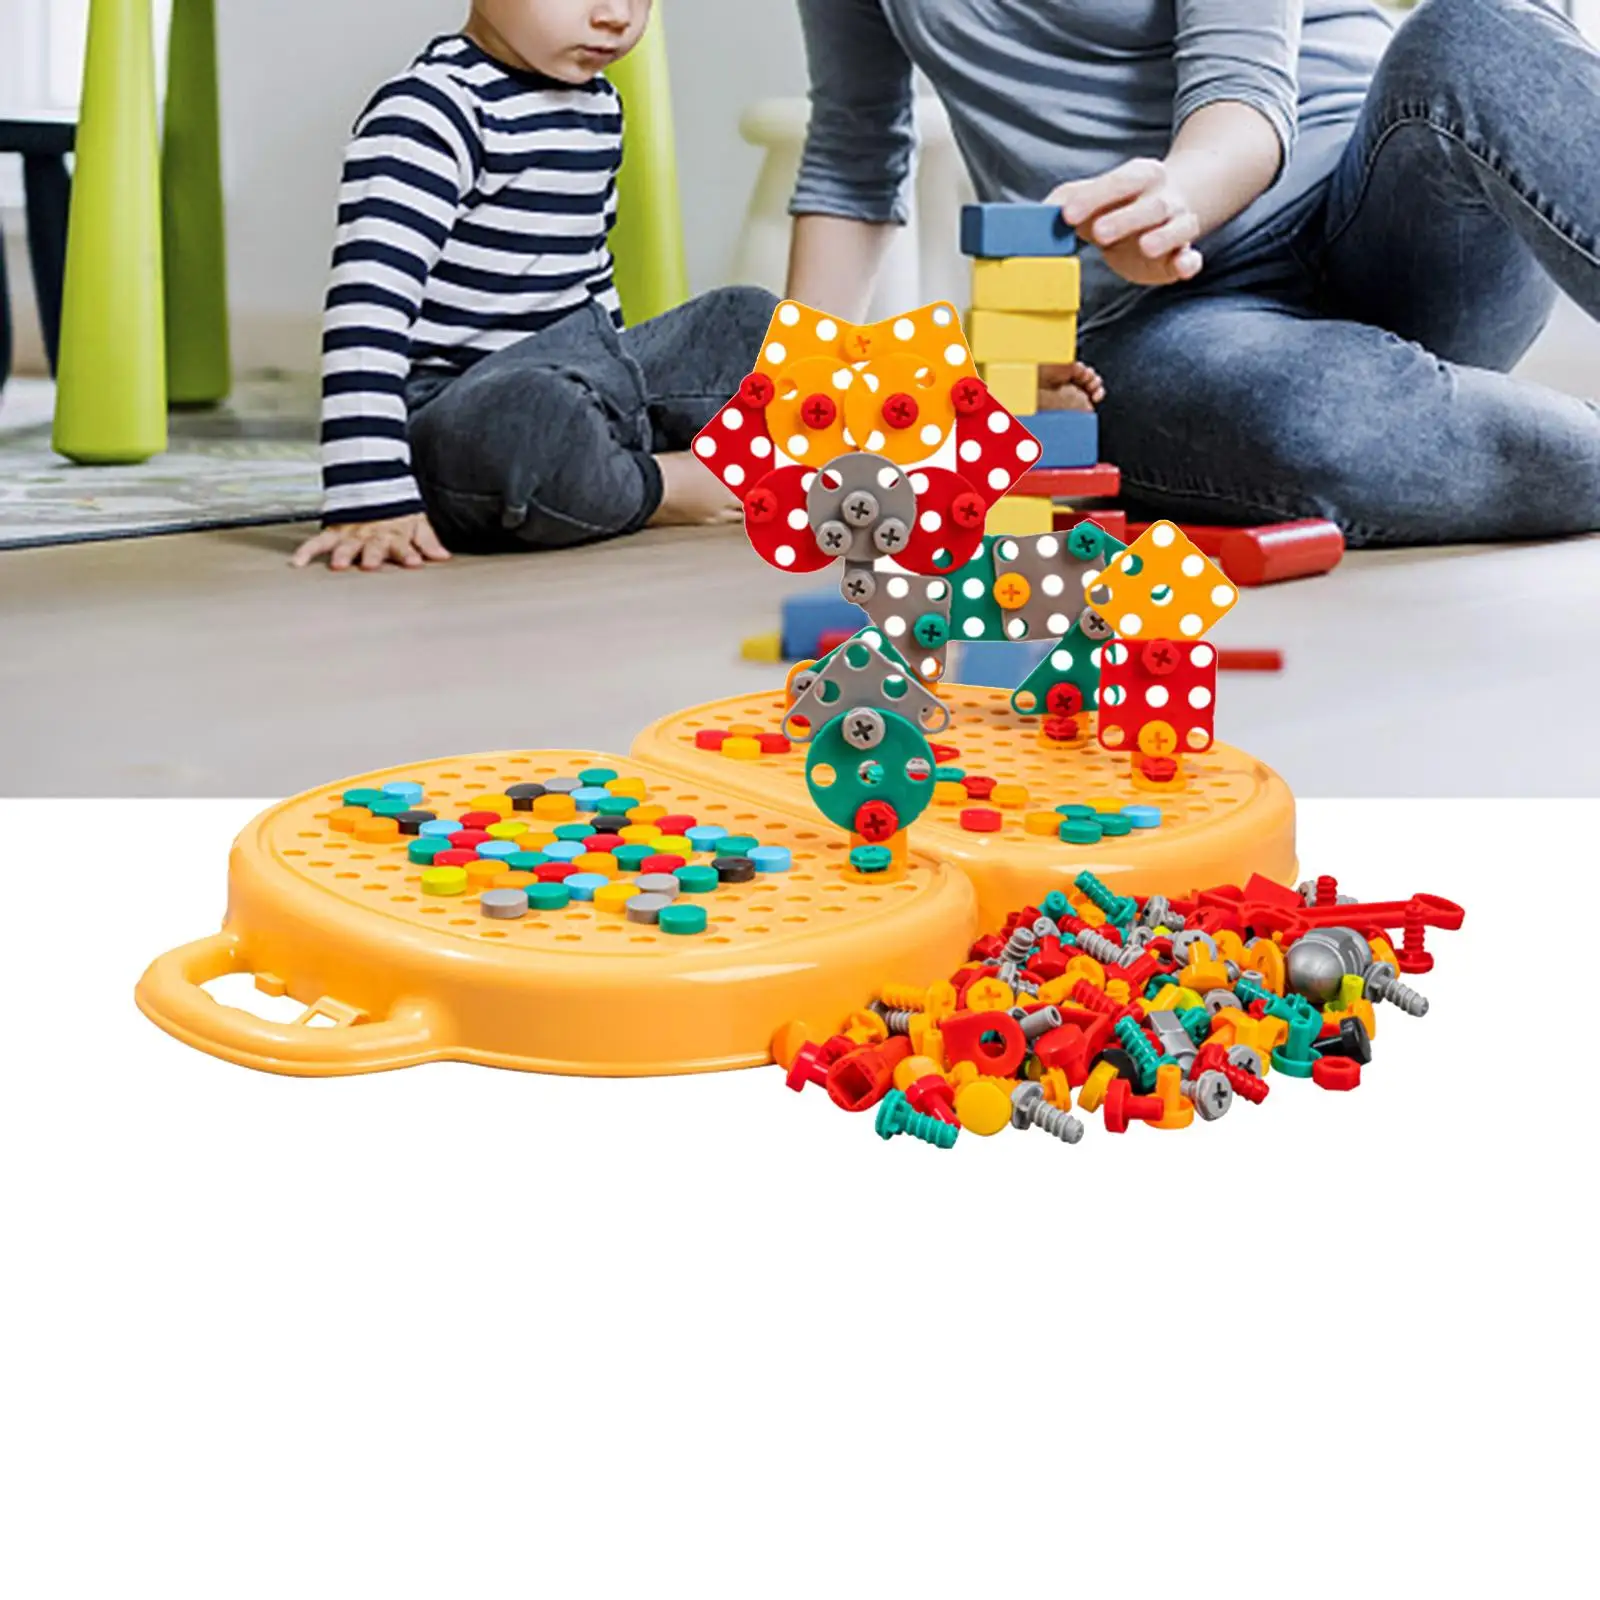 Creative Building Toys Puzzle Toys Building Blocks Games Set Learning Toys DIY Assembly for Children Birthday Gifts